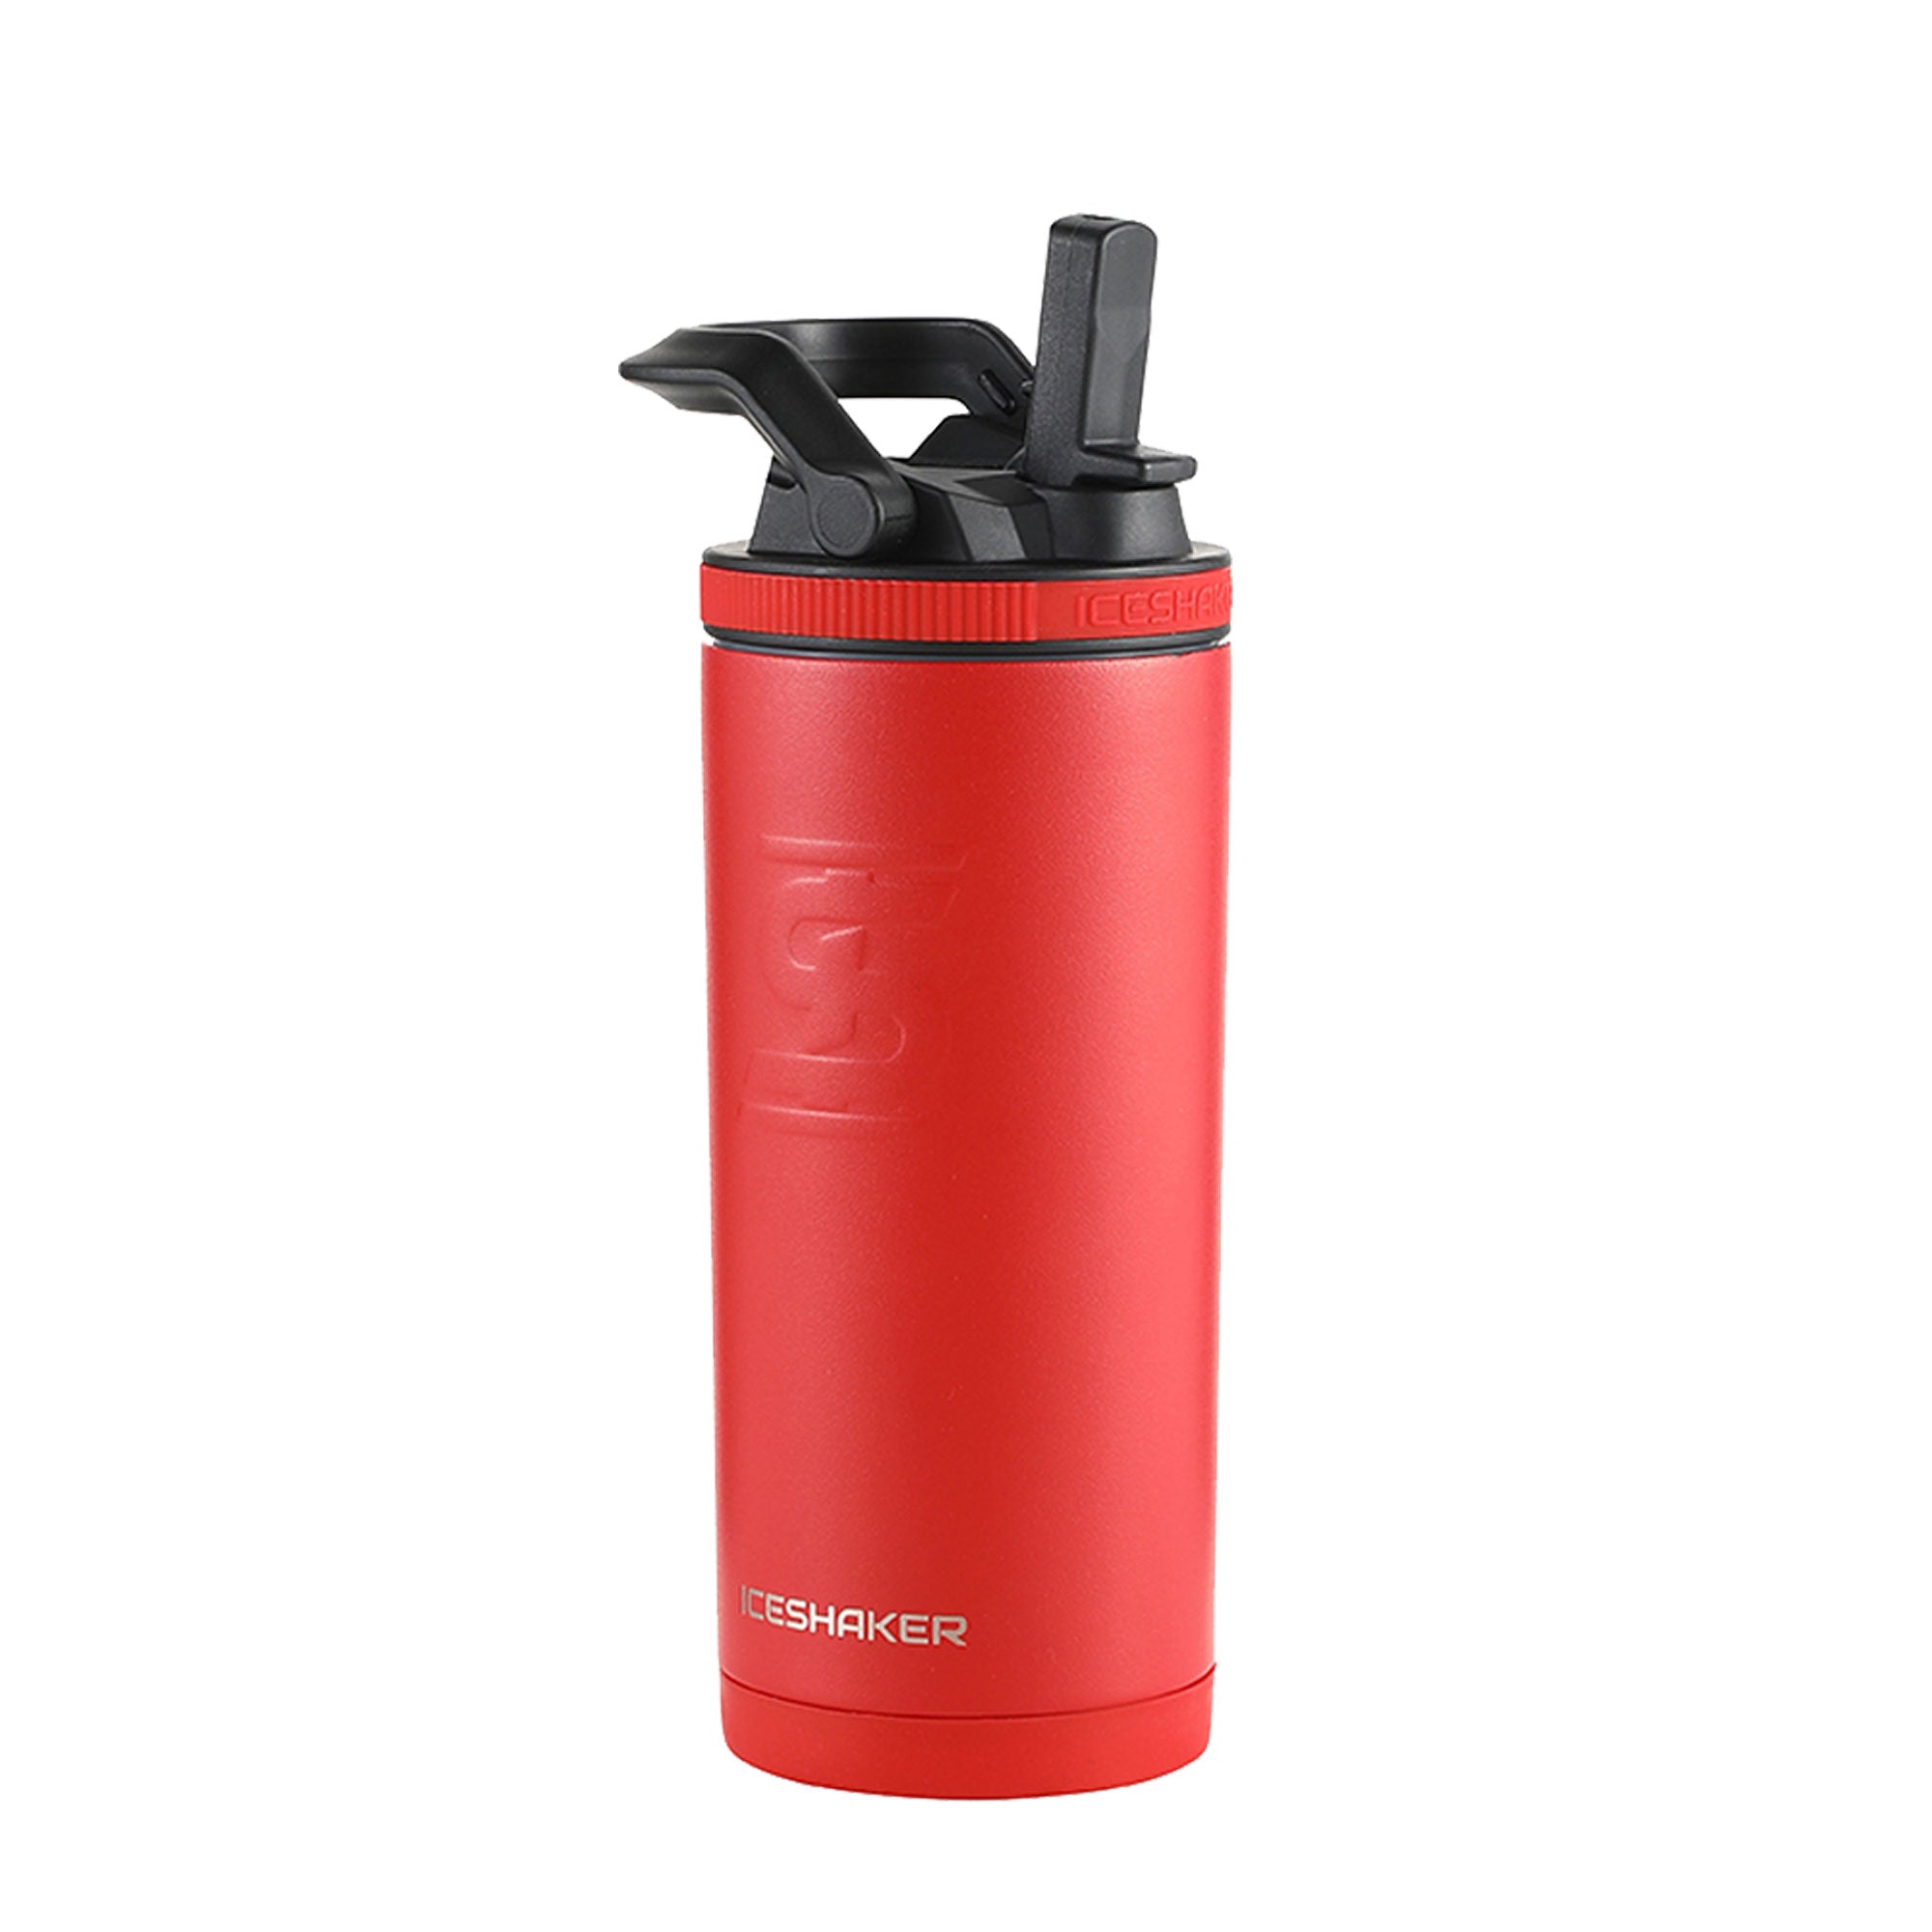 Ice Shaker: The Insulated Shaker Bottle That Keeps Your Drink Cold For Hours